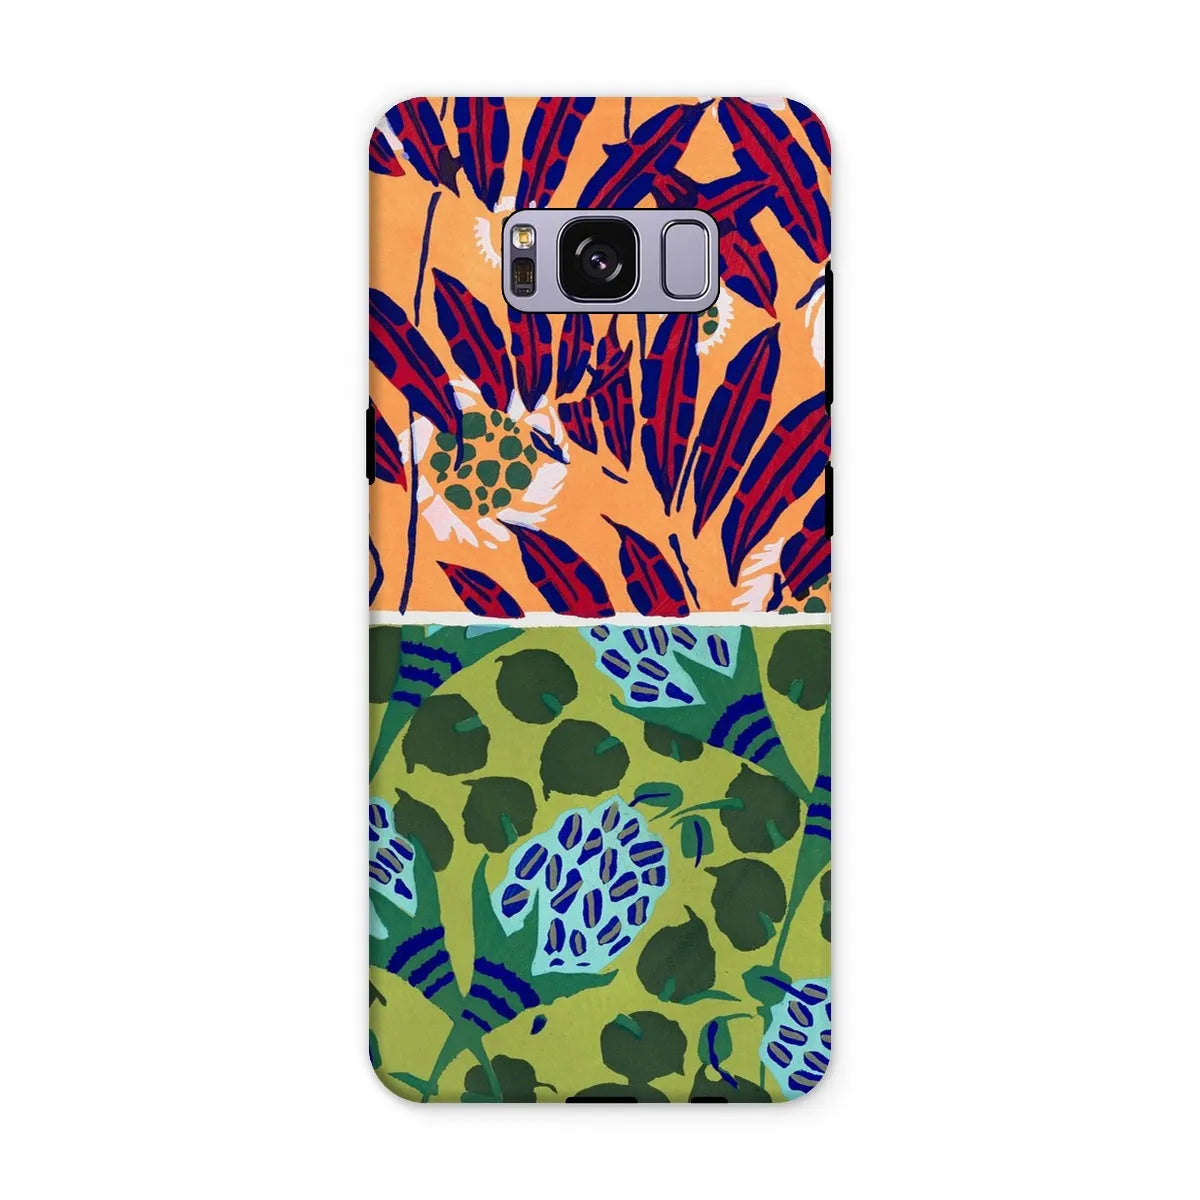 Fabric & Rugs Too - Pochoir Pattern Phone Case - E. A. Séguy - Samsung Galaxy S8 Plus / Matte - Mobile Phone Cases